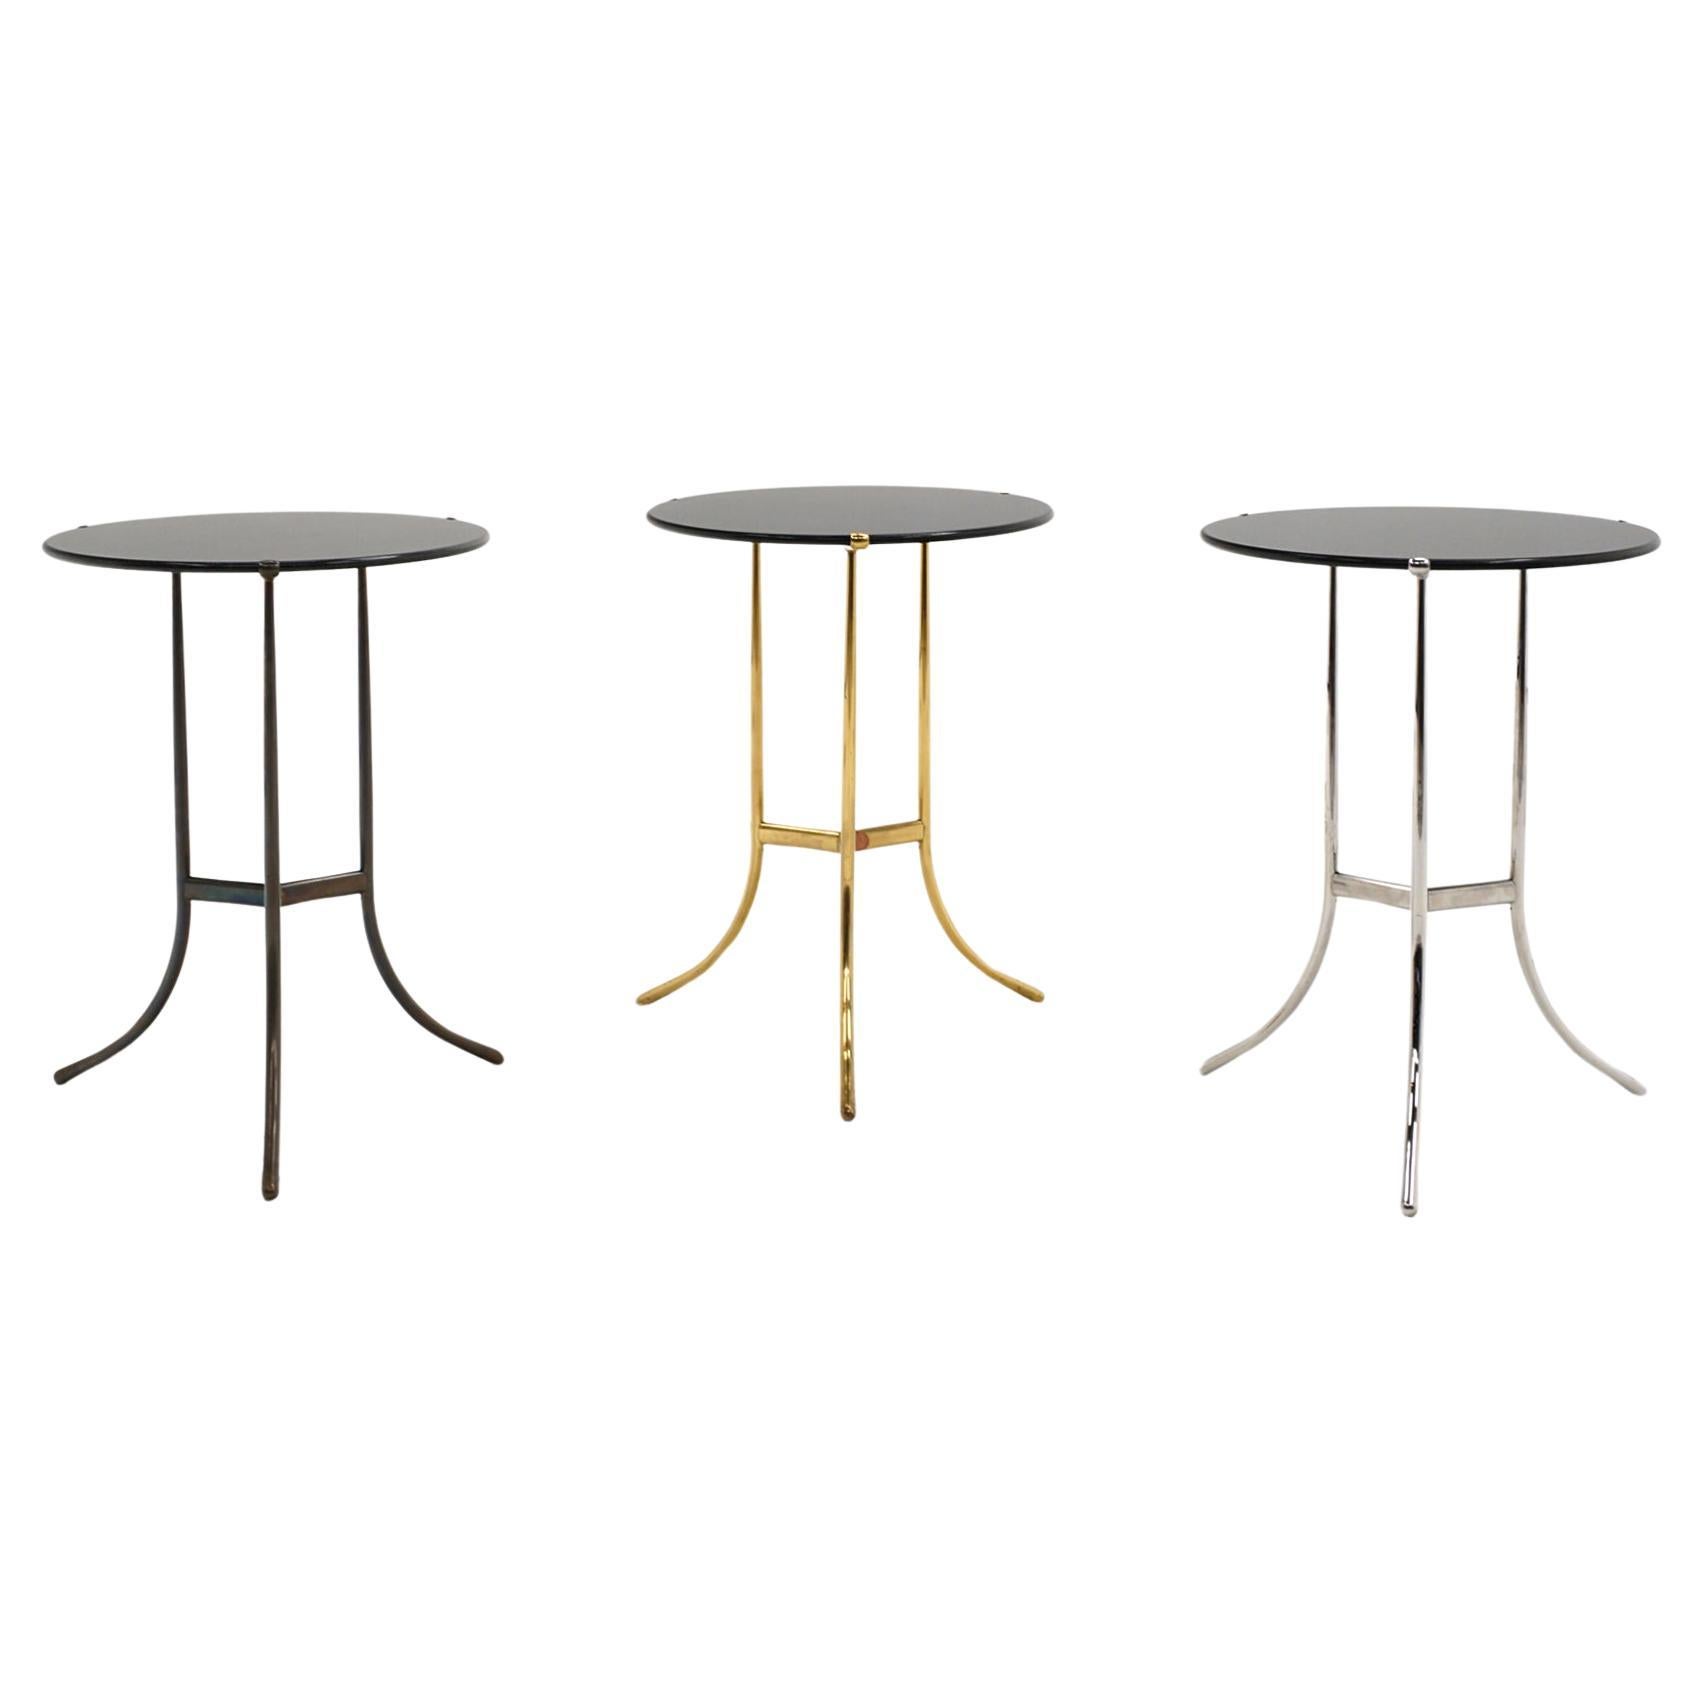 Three Cedric Hartman Side Tables in Three different Finishes. Granite Tops. For Sale